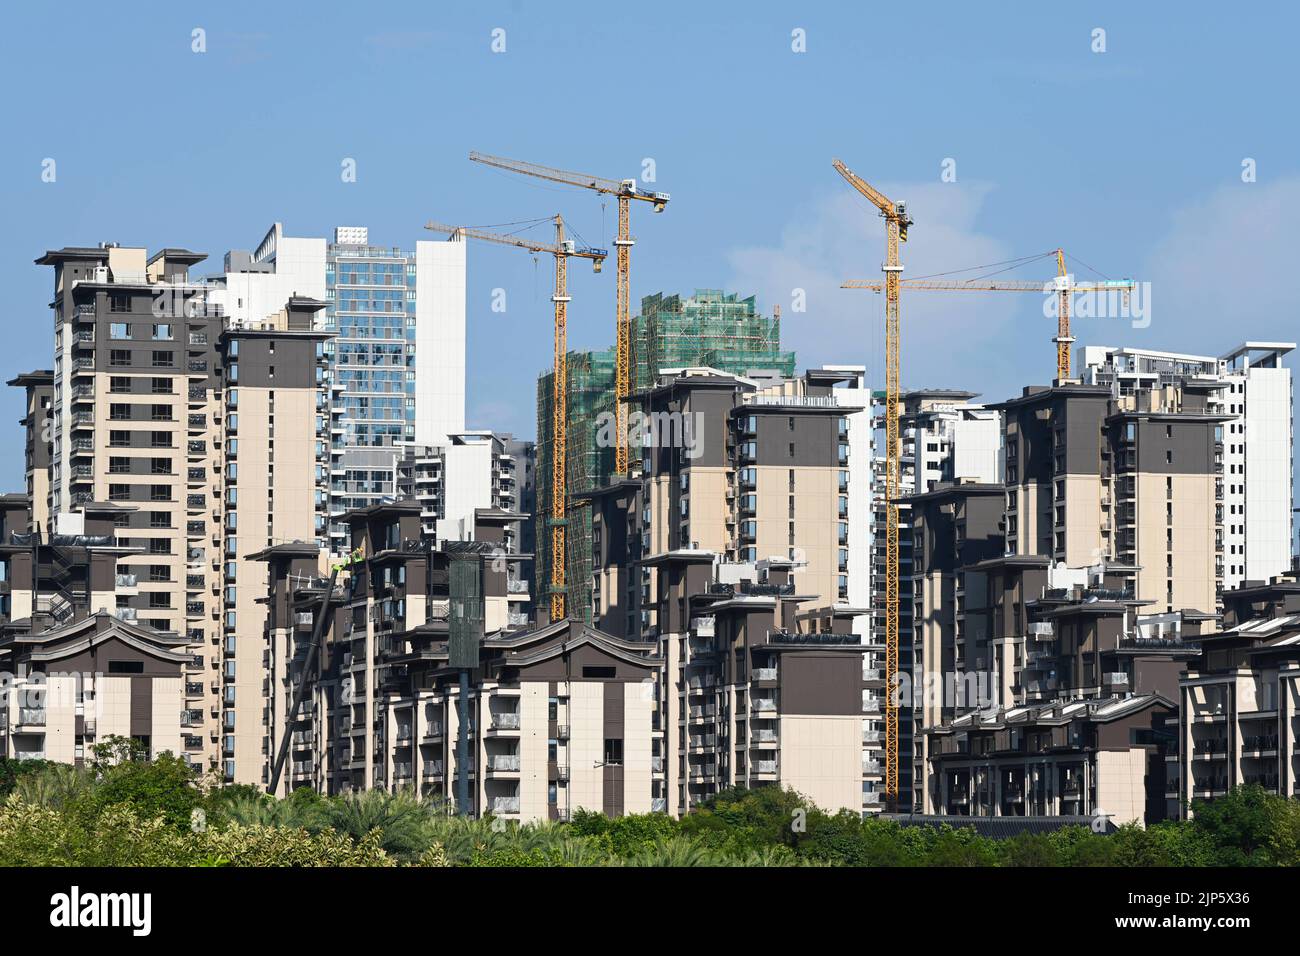 NANNING, CHINA - AUGUST 15, 2022 - A real estate complex under construction is seen in an urban area in Nanning, South China's Guangxi Zhuang autonomo Stock Photo